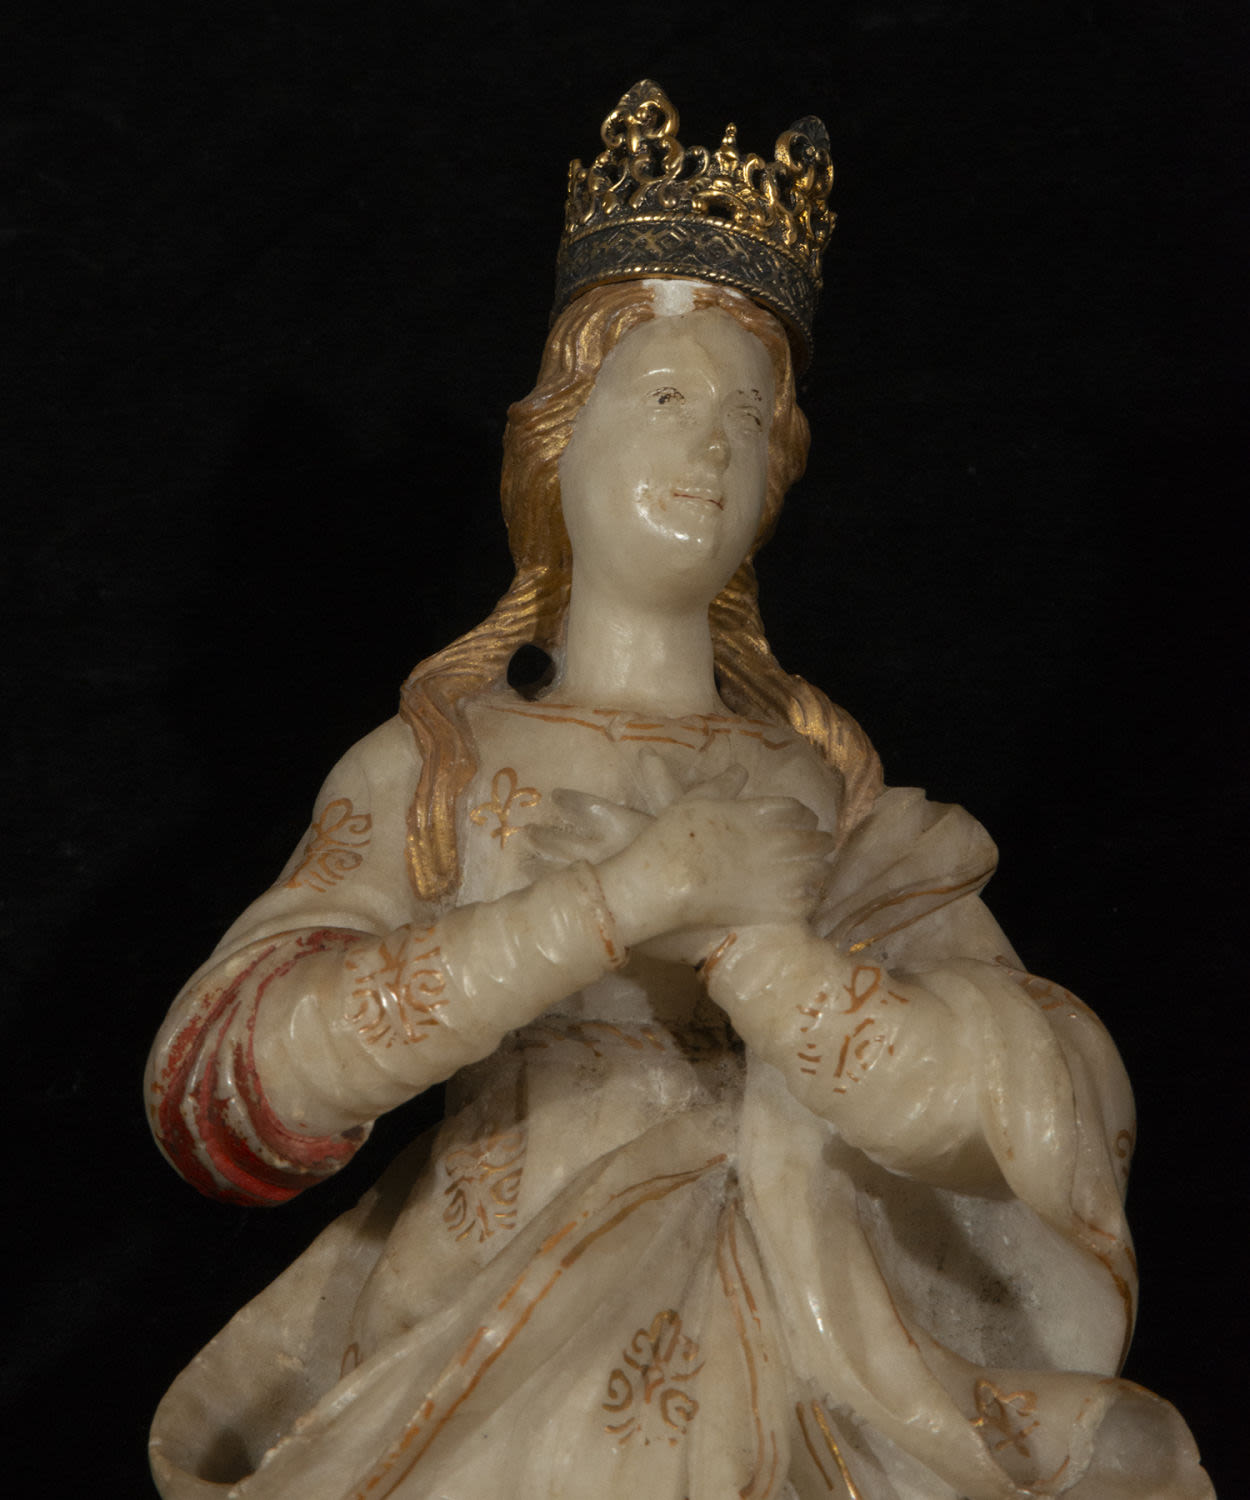 Magnificent Immaculate Virgin of Huamanga Alabaster, Viceregal colonial work of Peru, 17th Century S - Image 2 of 5